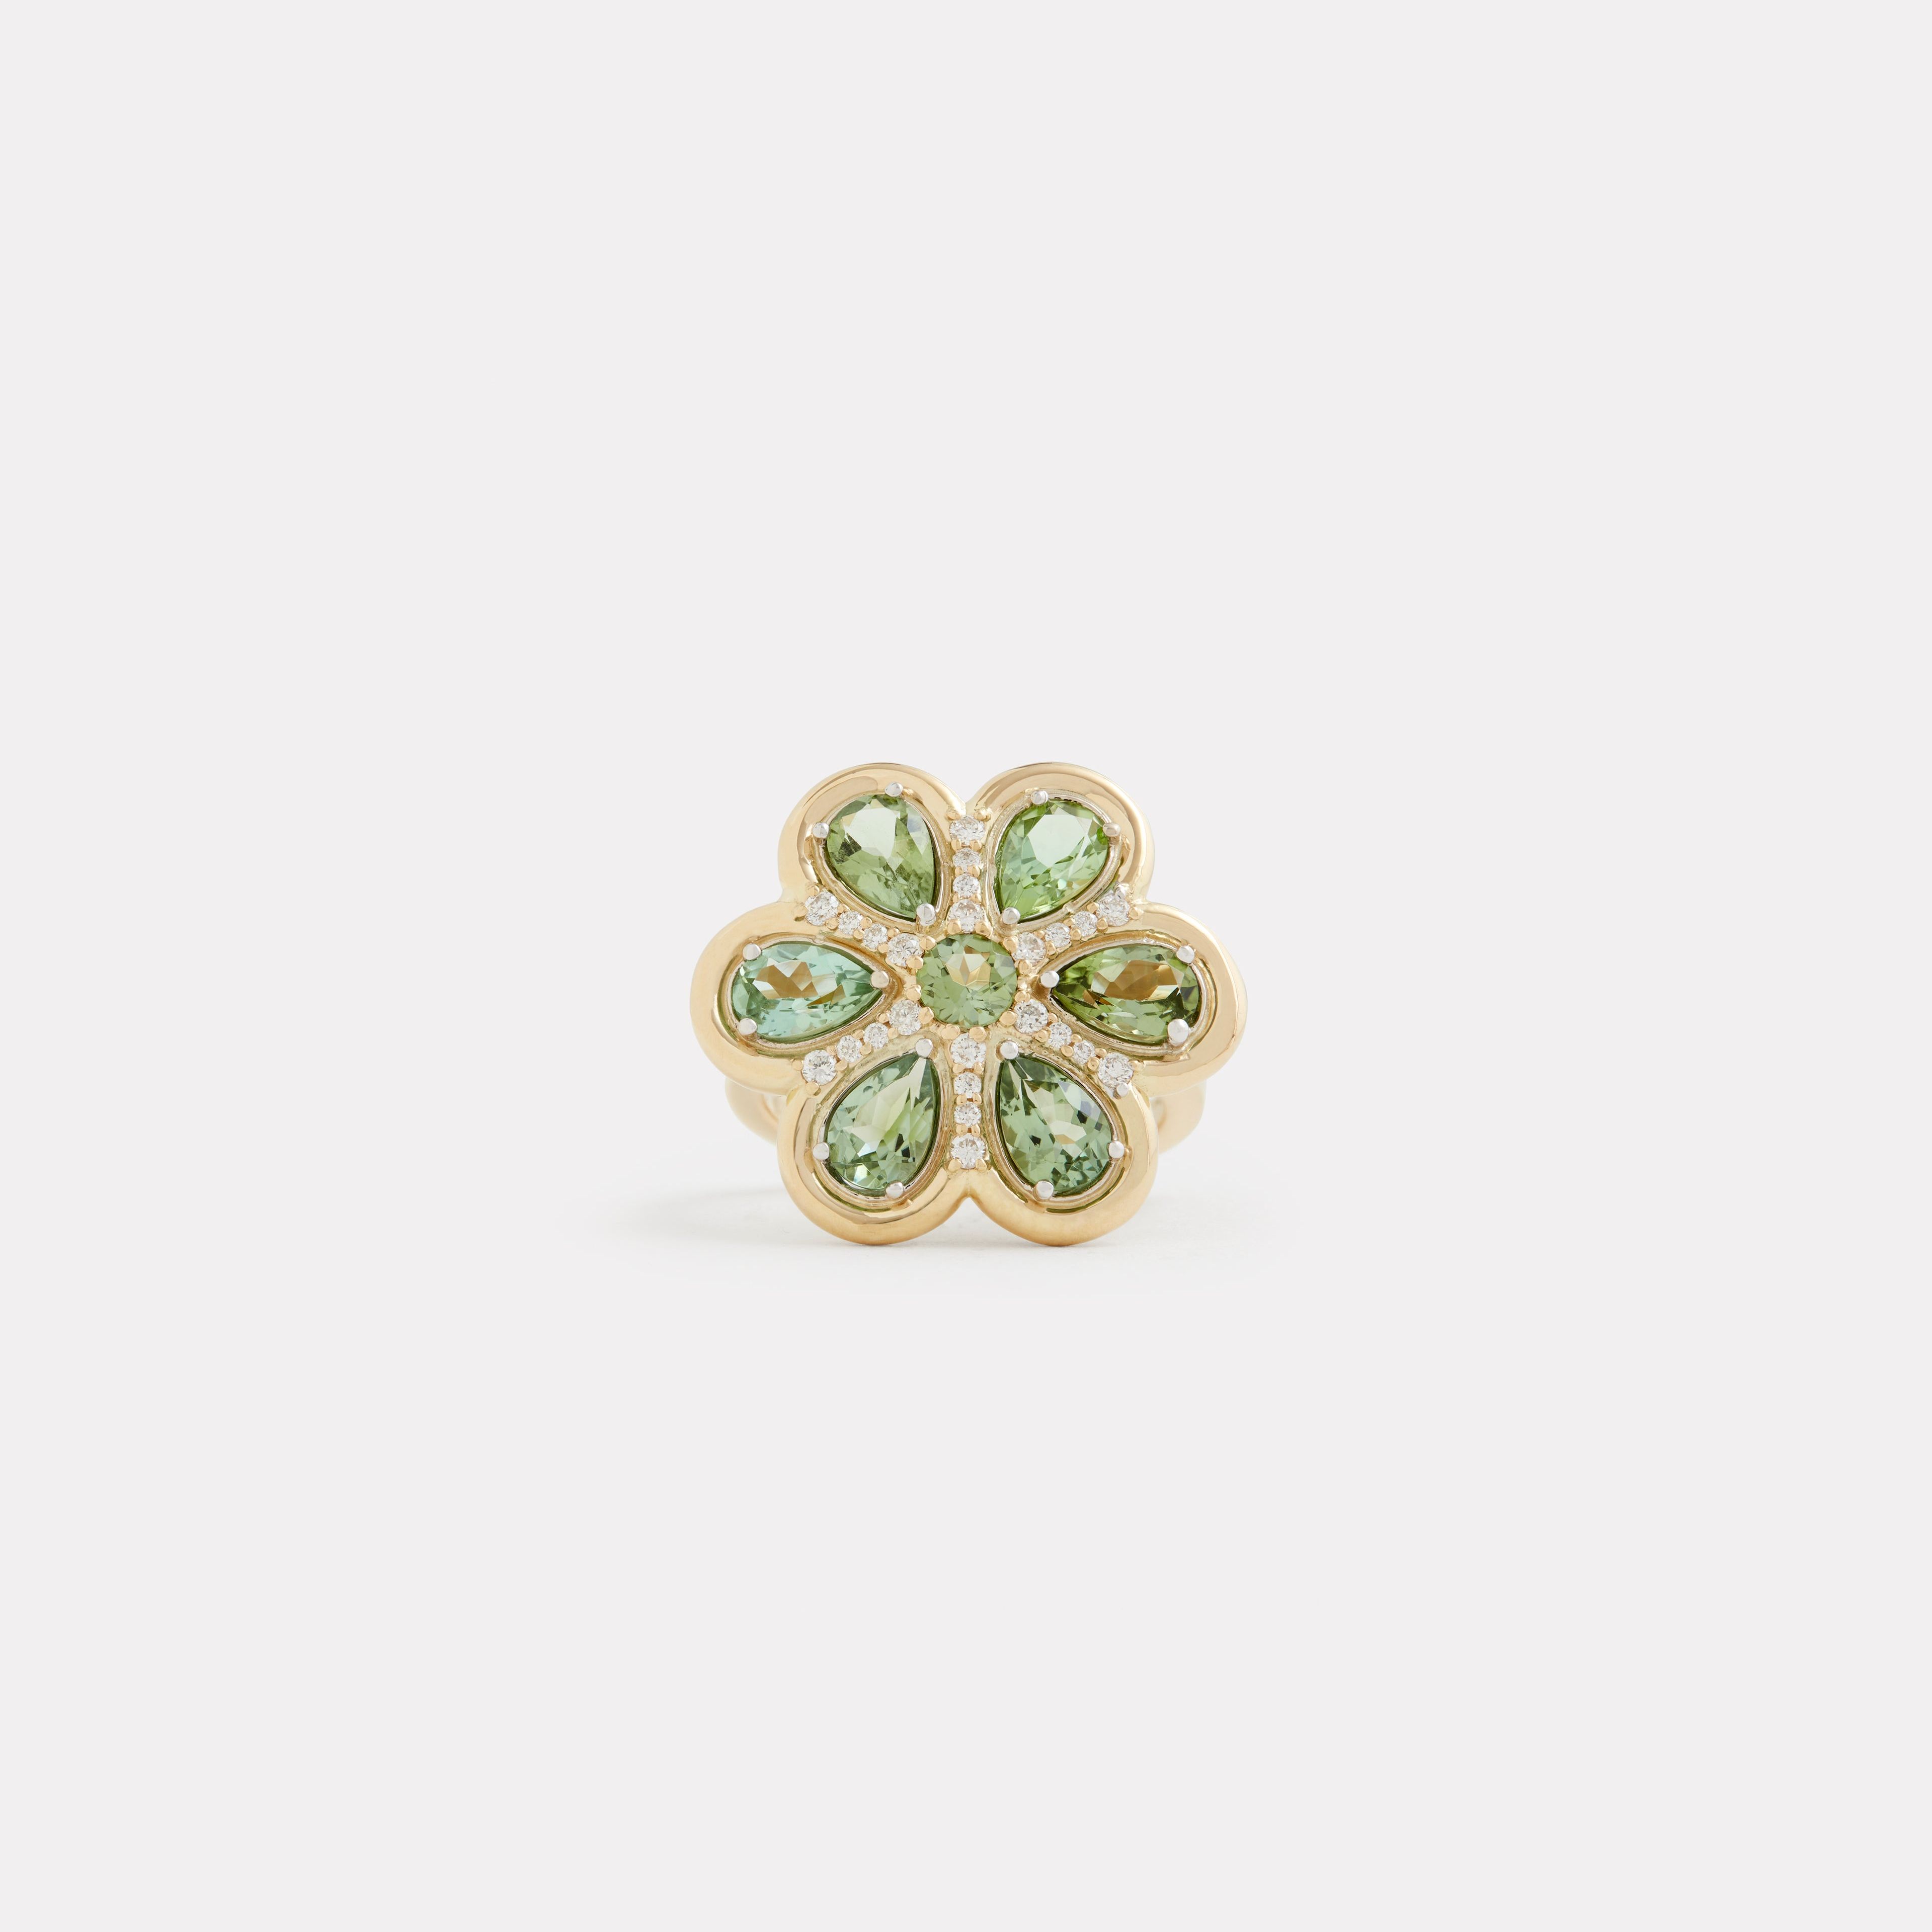 Yellow Gold and White Floral Ring with Tourmaline and Diamonds